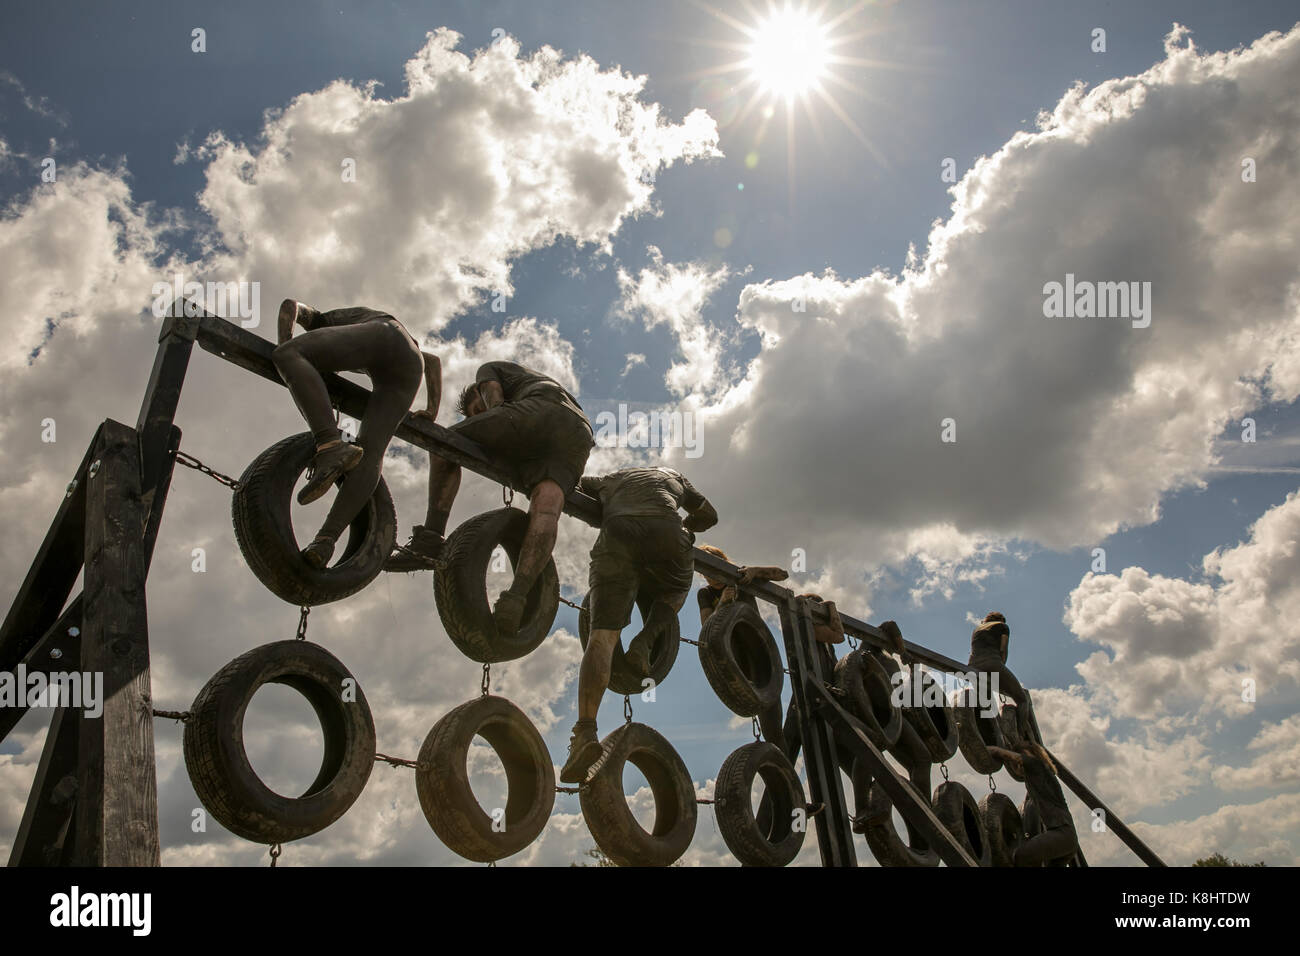 Warsaw, Poland - May 27, 2017: An obstacle during the obstacle course Stock Photo